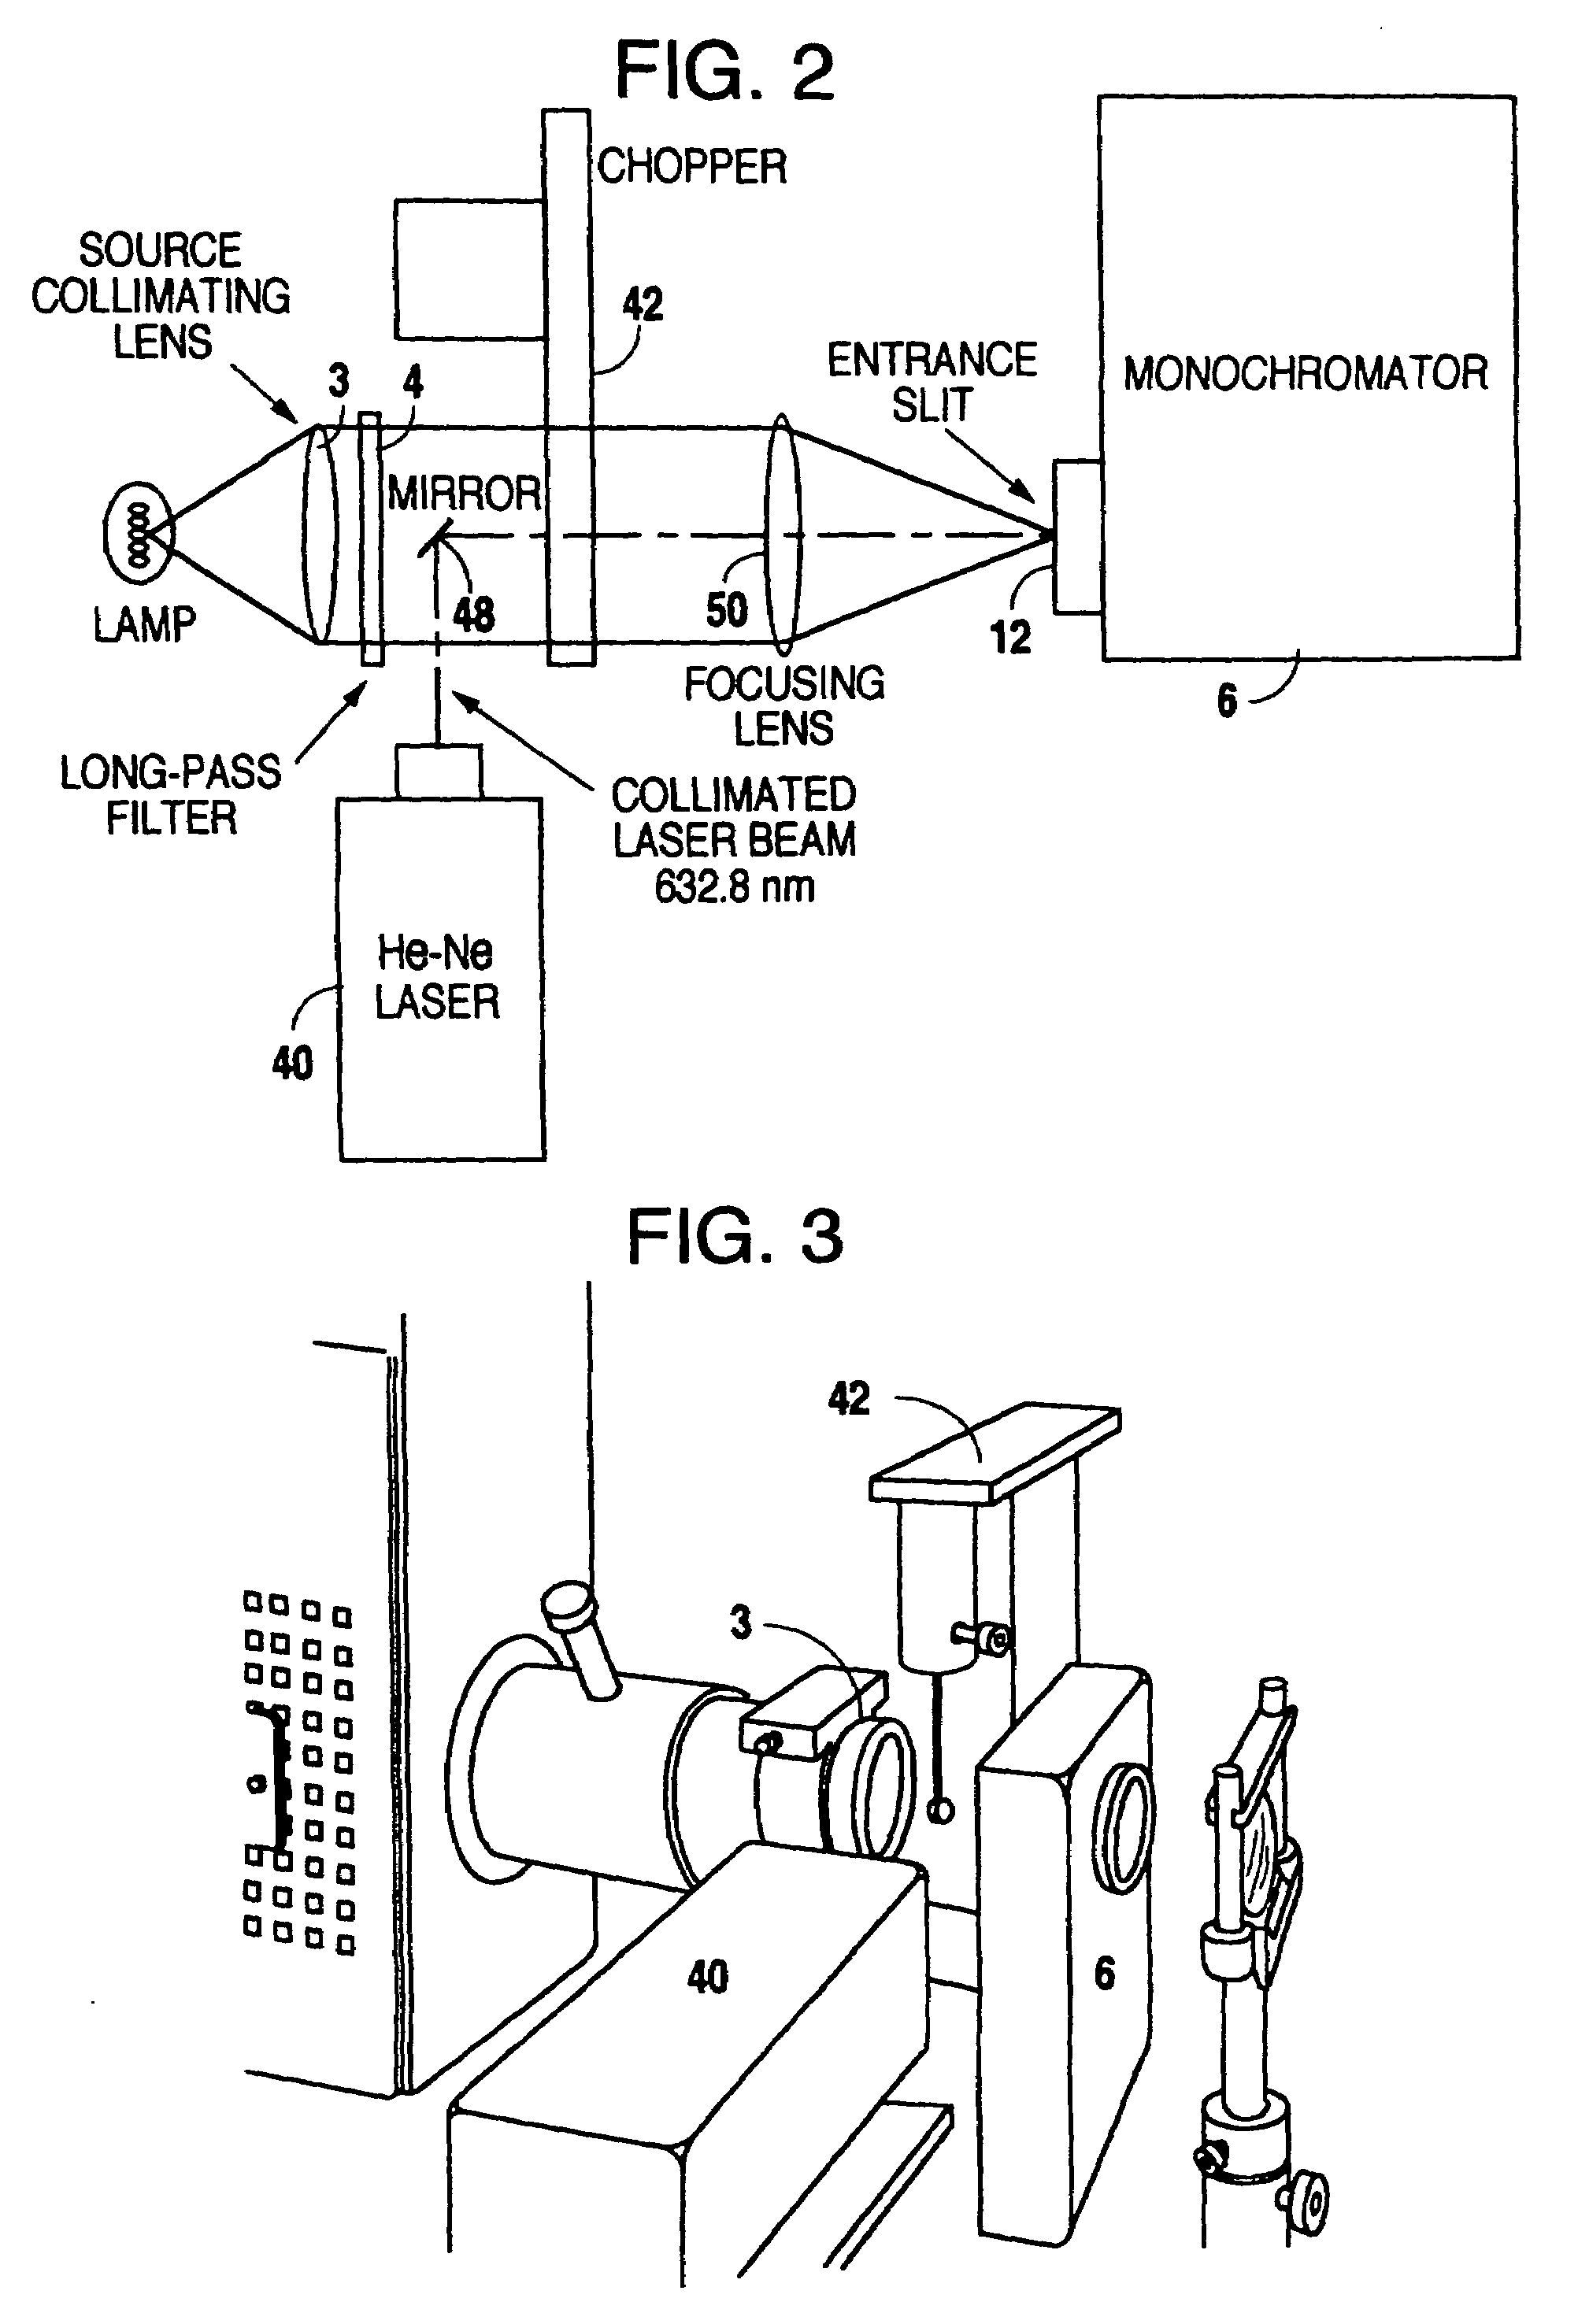 Dispersive near-infrared spectrometer with automatic wavelength calibration